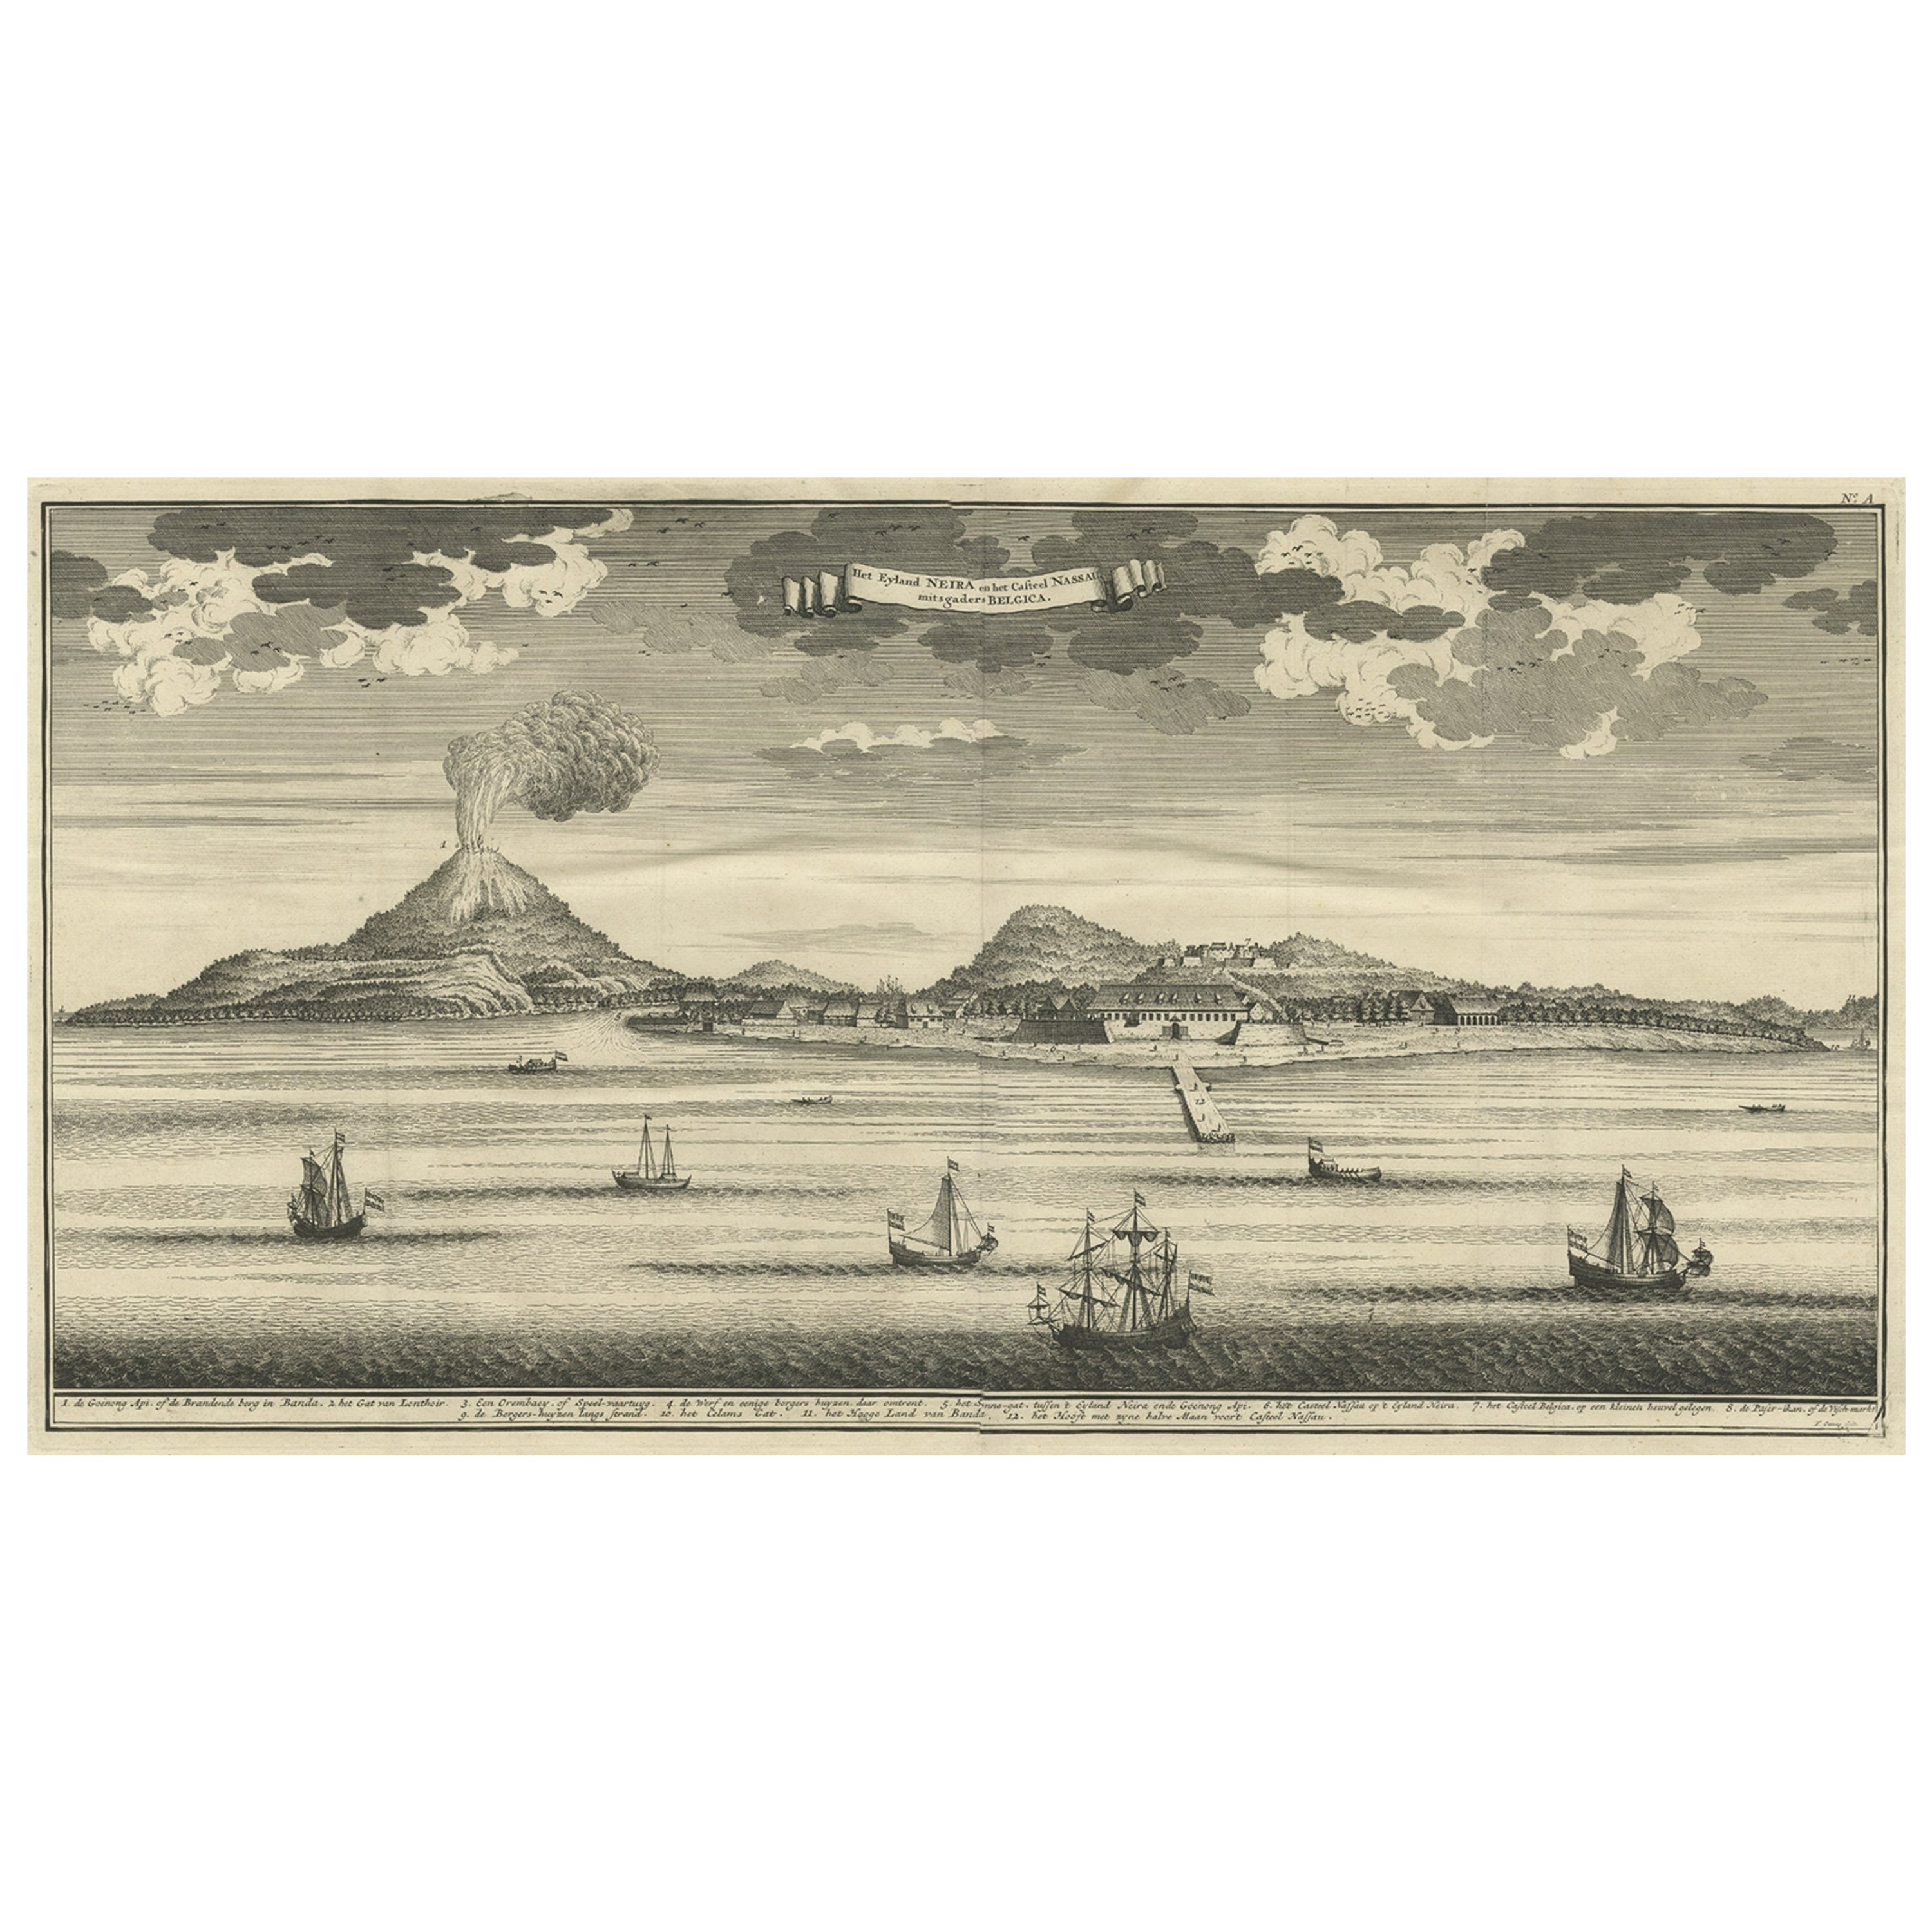 Beautiful Old View of Spice Island Banda Neira with Fort Nassau, Indonesia, 1726